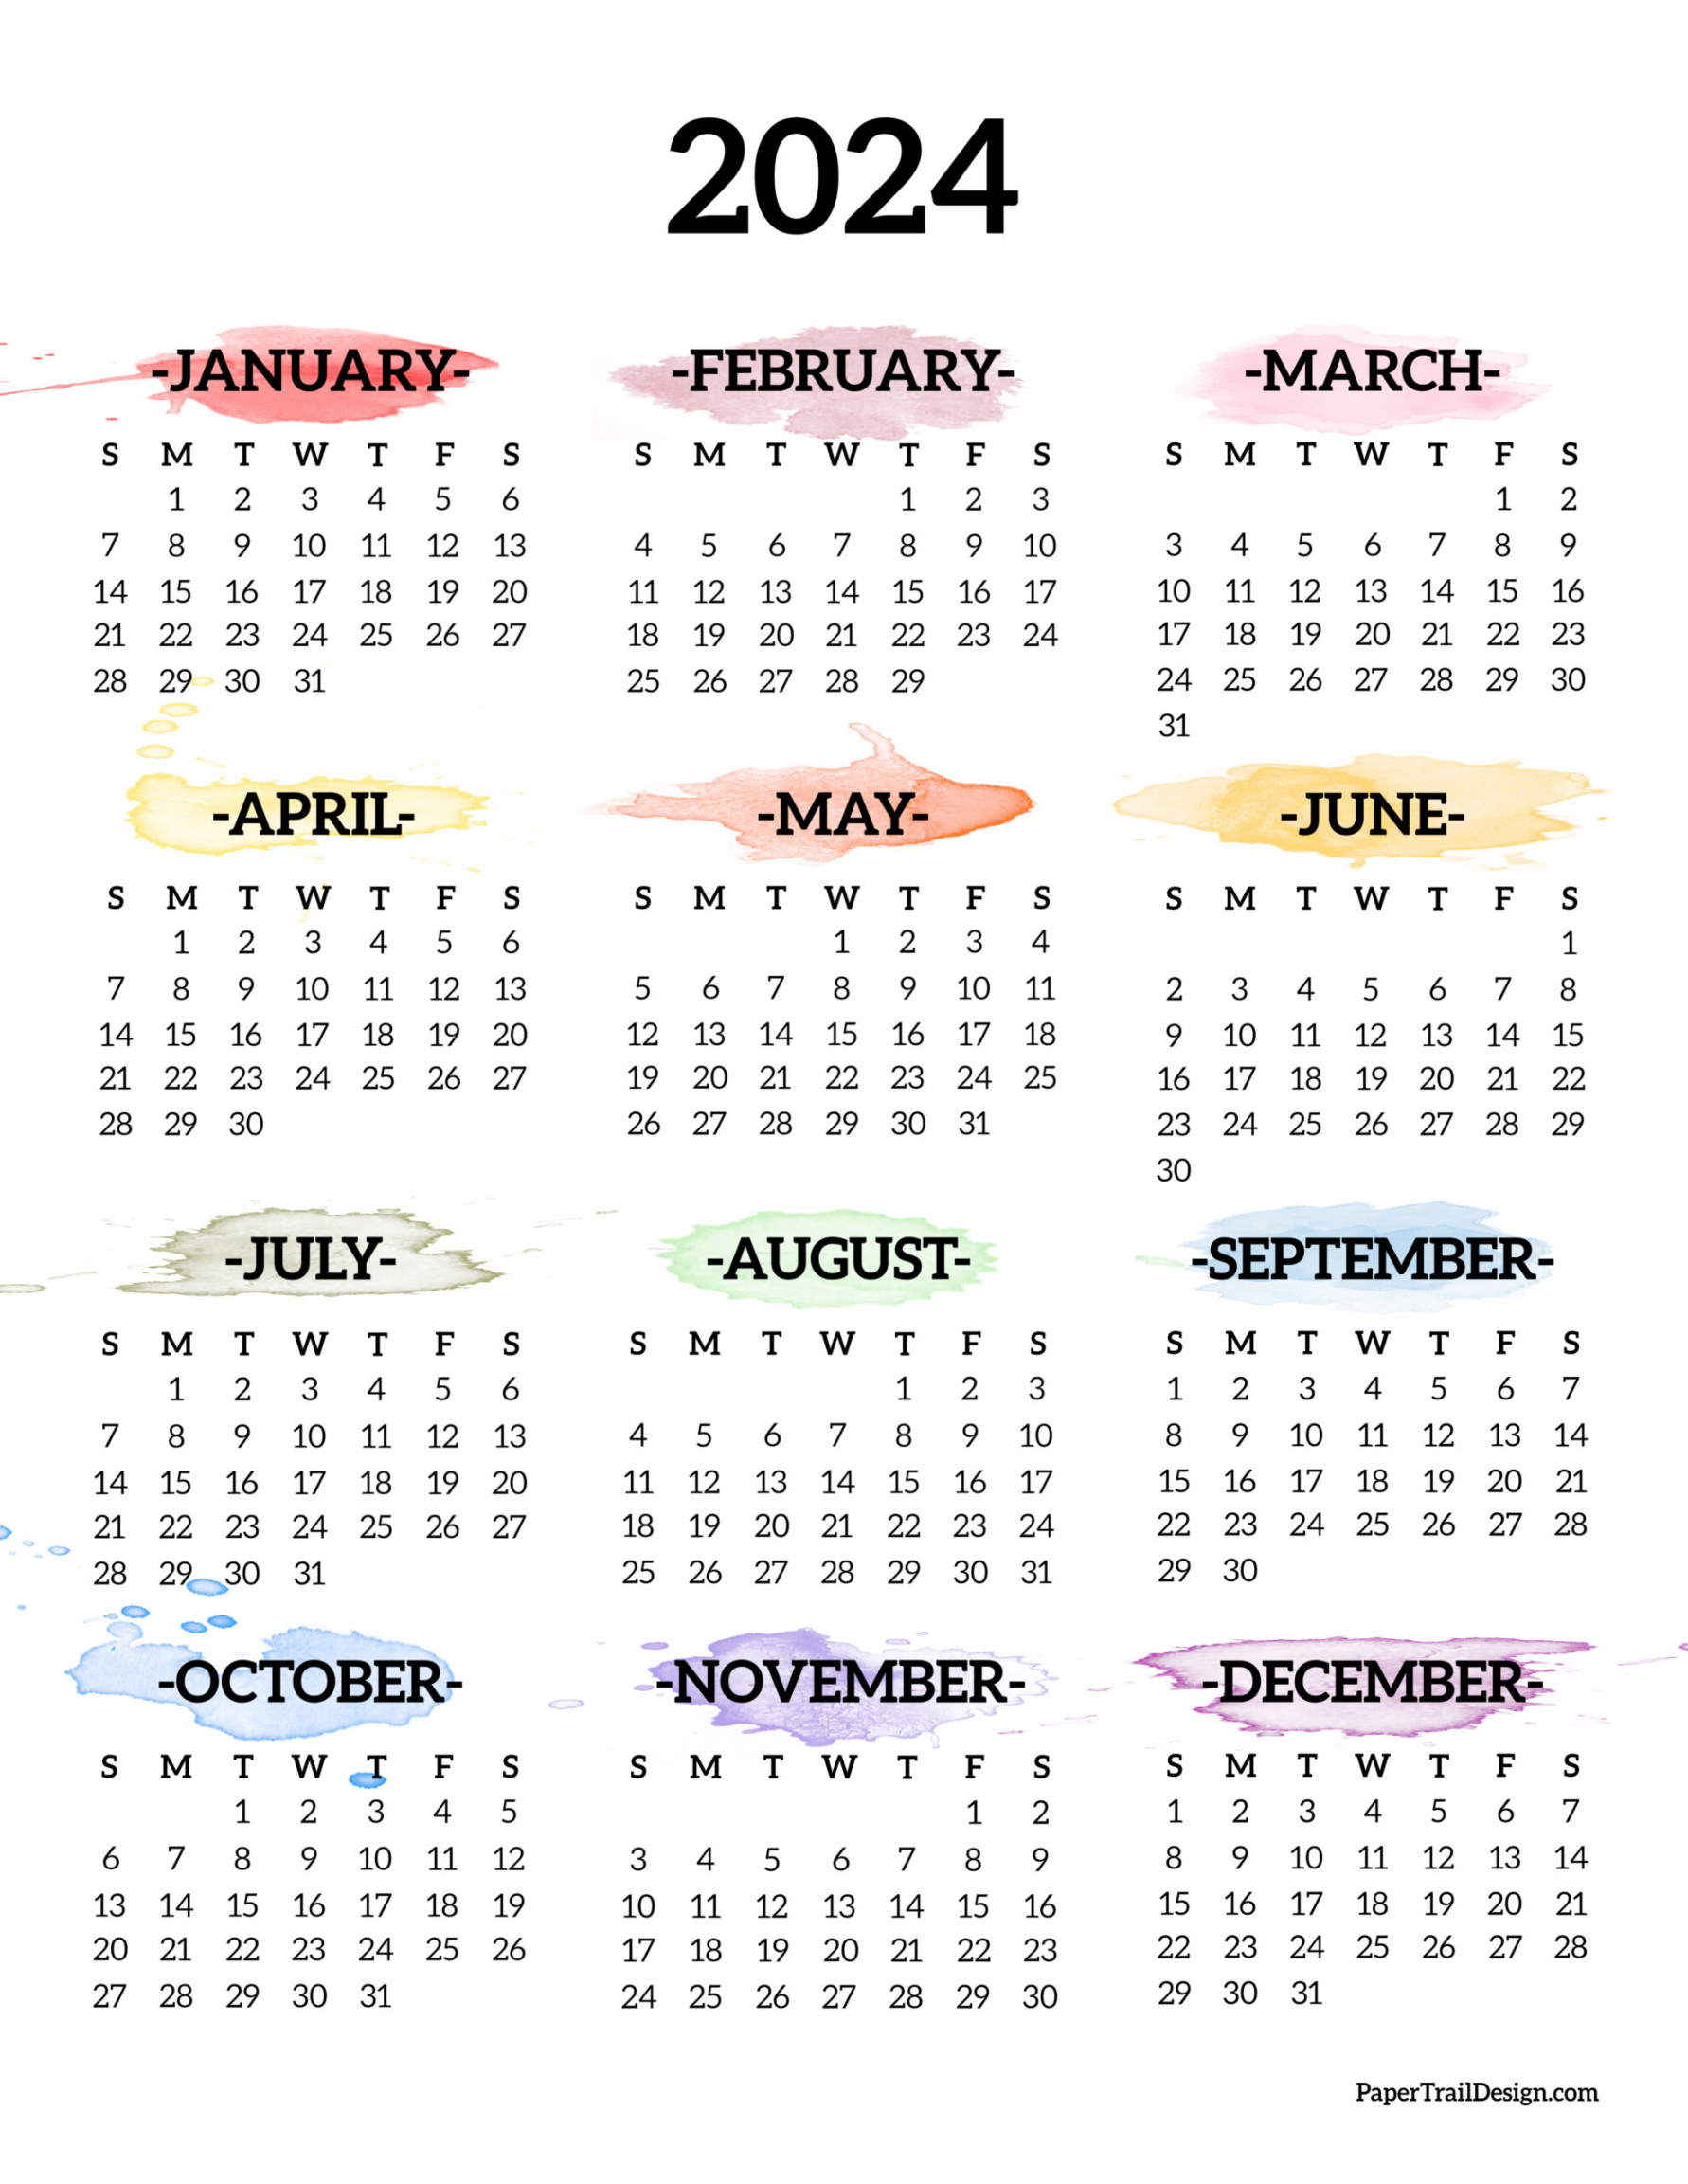 Calendar Printable One Page - Paper Trail Design